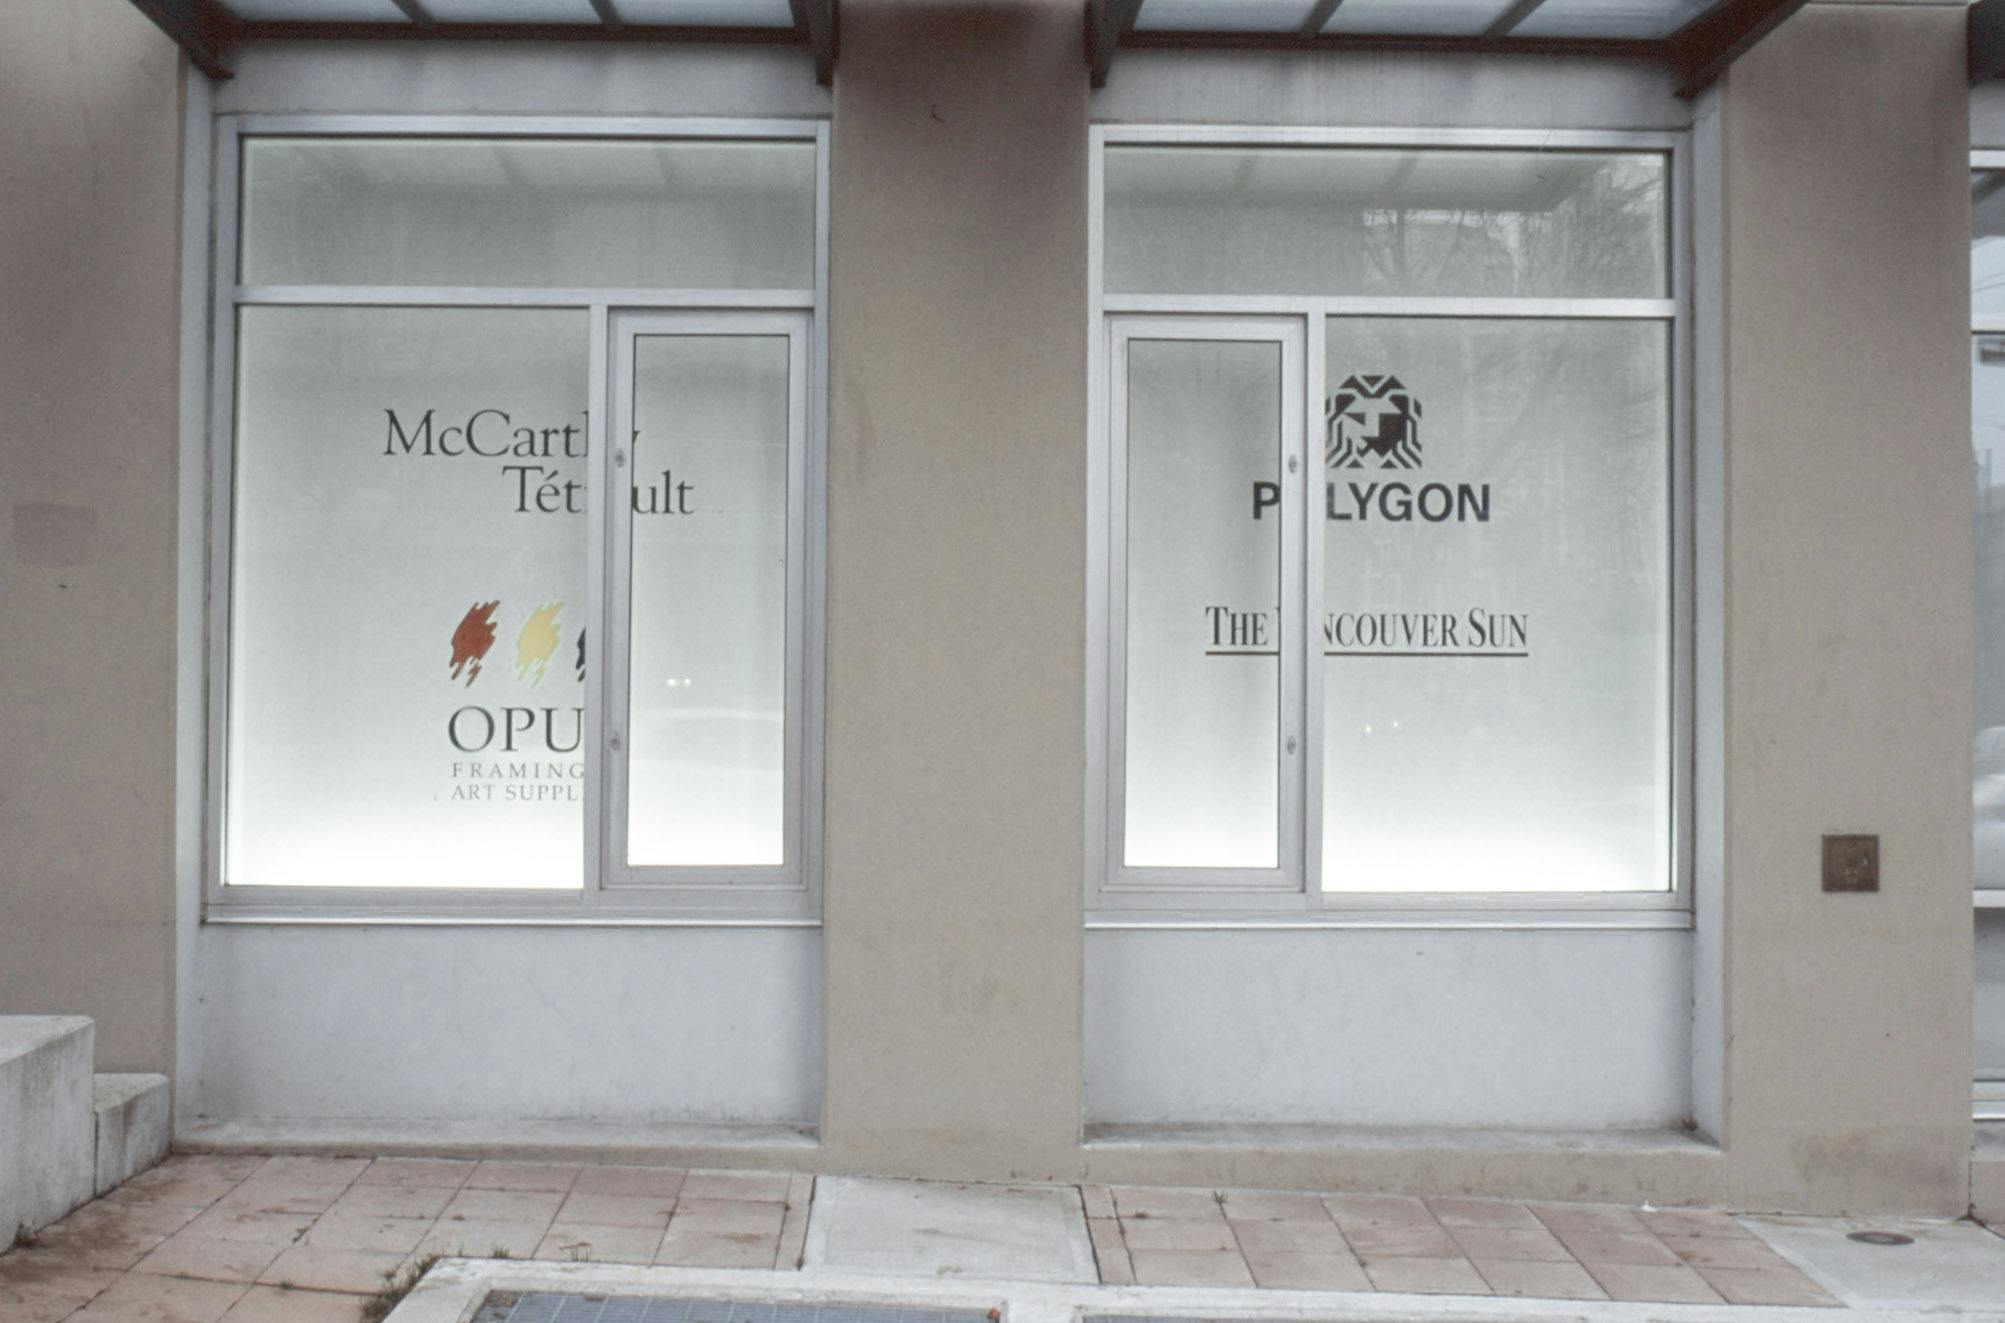 Two of the CAG window spaces are visible in this photograph. Four logos of different companies and organisations are printed on the white walls behind the windows. 